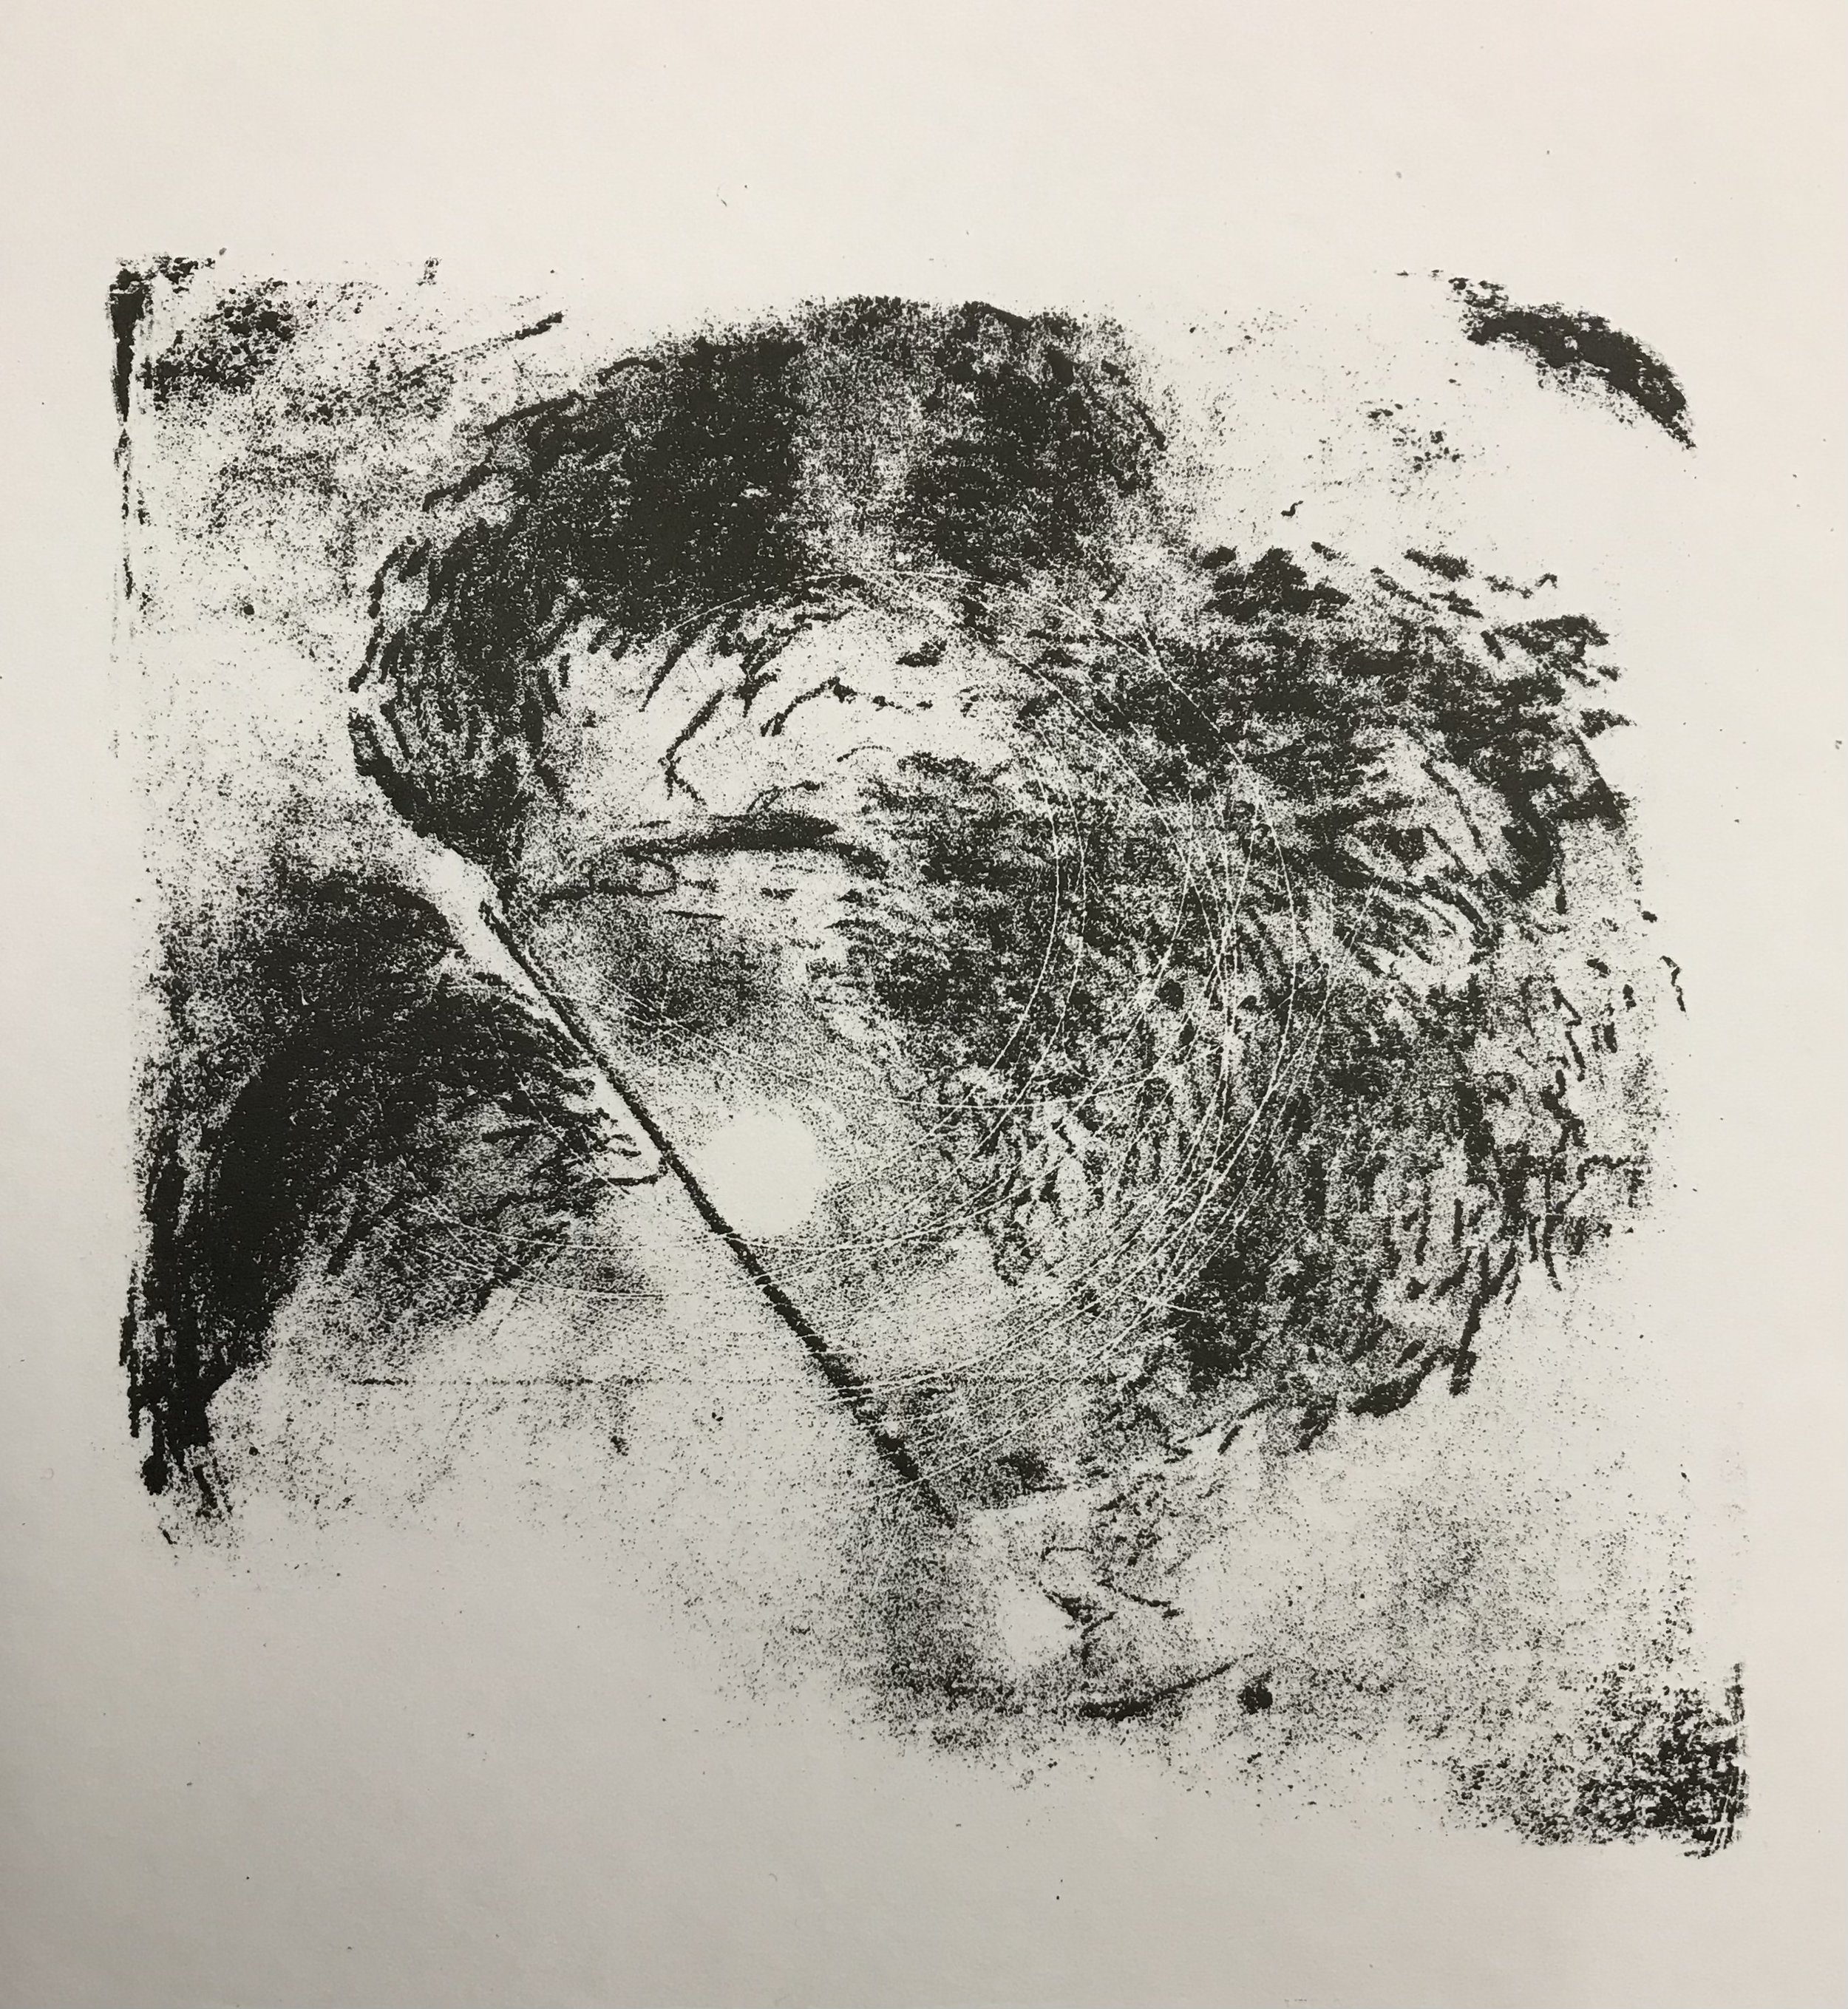 Untitled, lithograph, 17 x 17cm